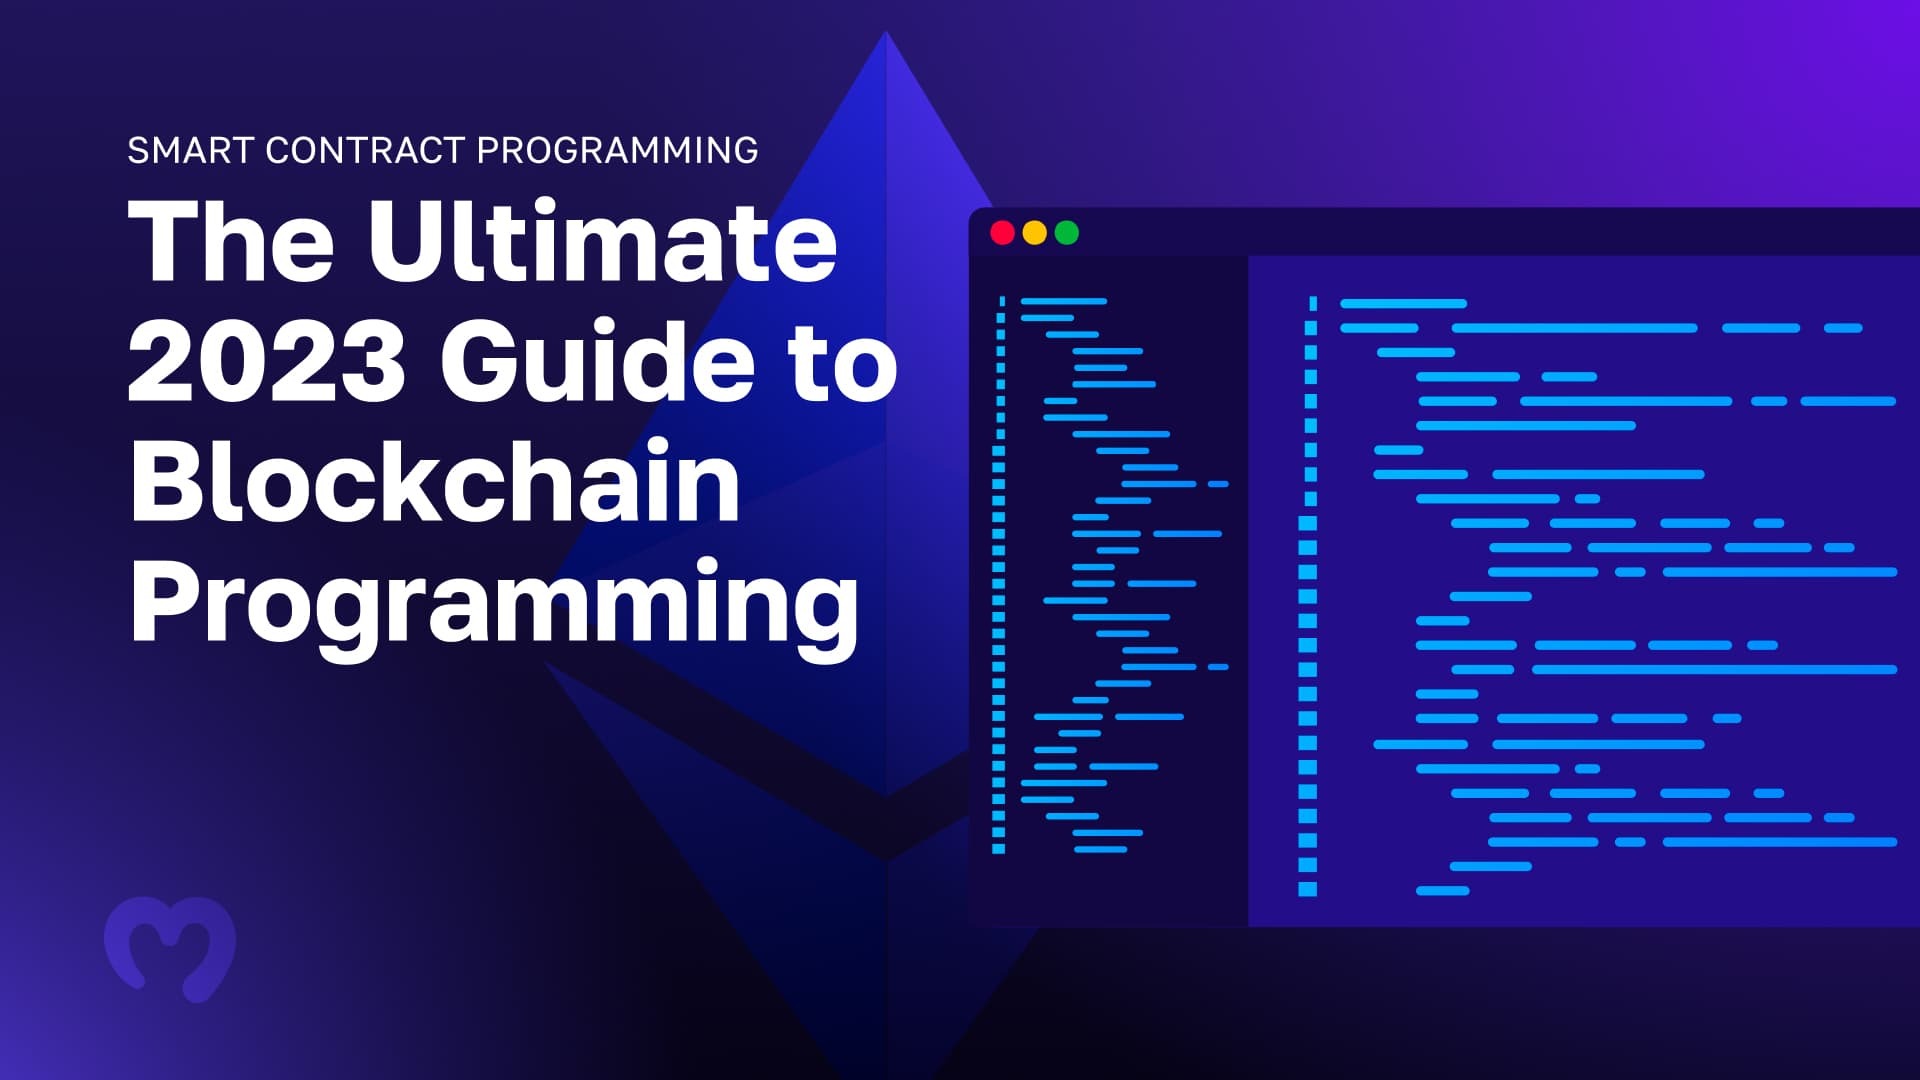 Exploring Smart Contract Programming - The Ultimate 2023 Guide to Blockchain Programming